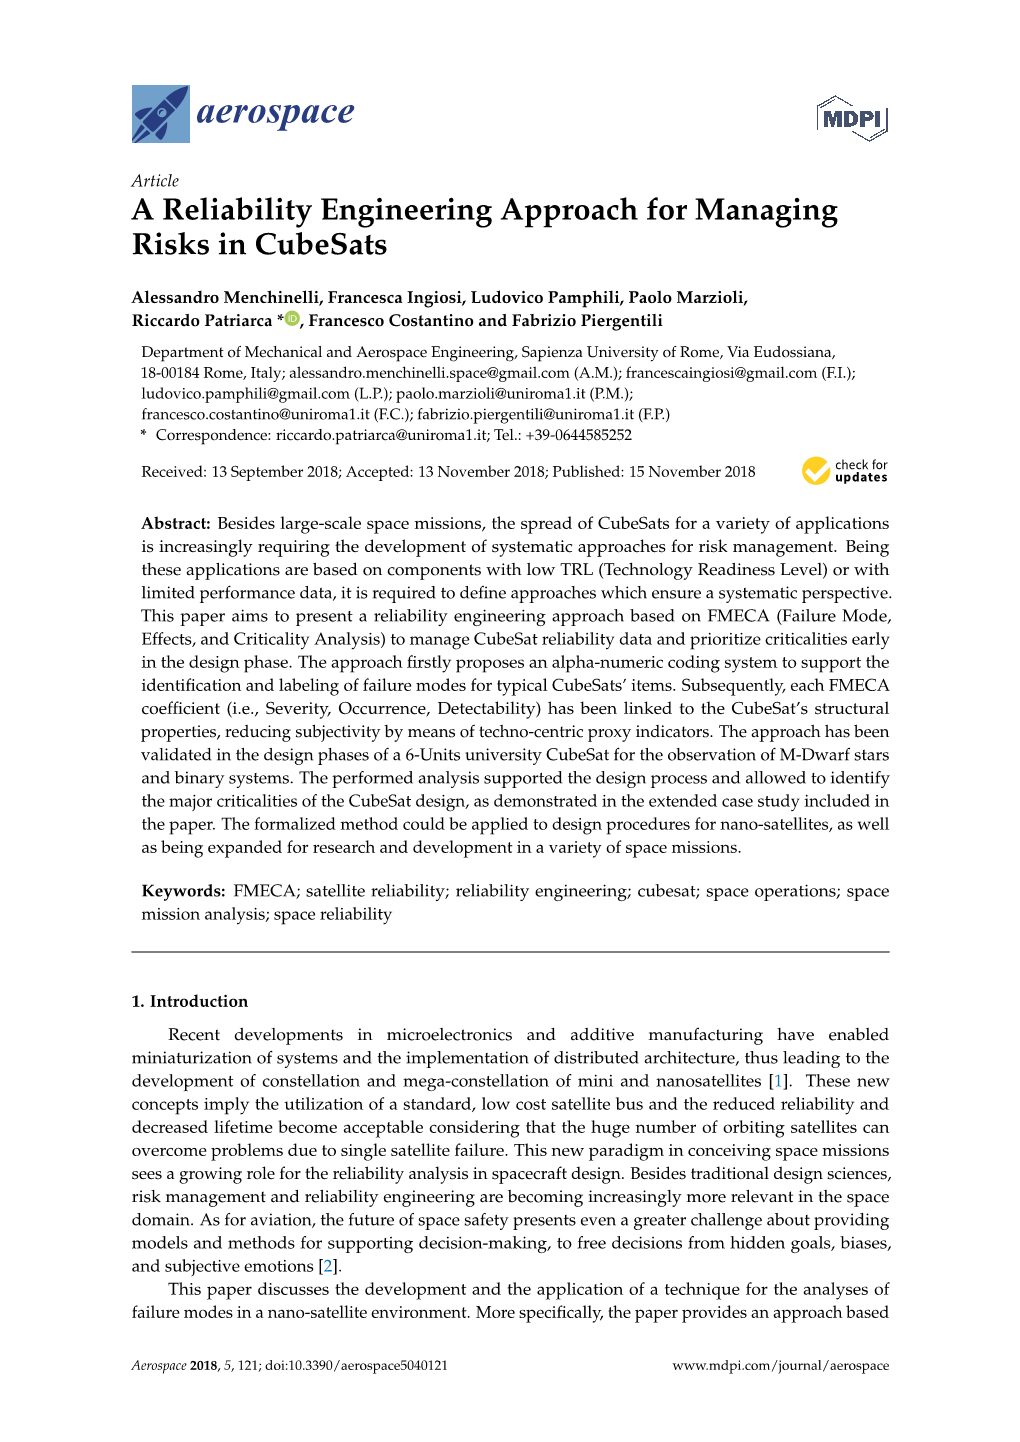 A Reliability Engineering Approach for Managing Risks in Cubesats